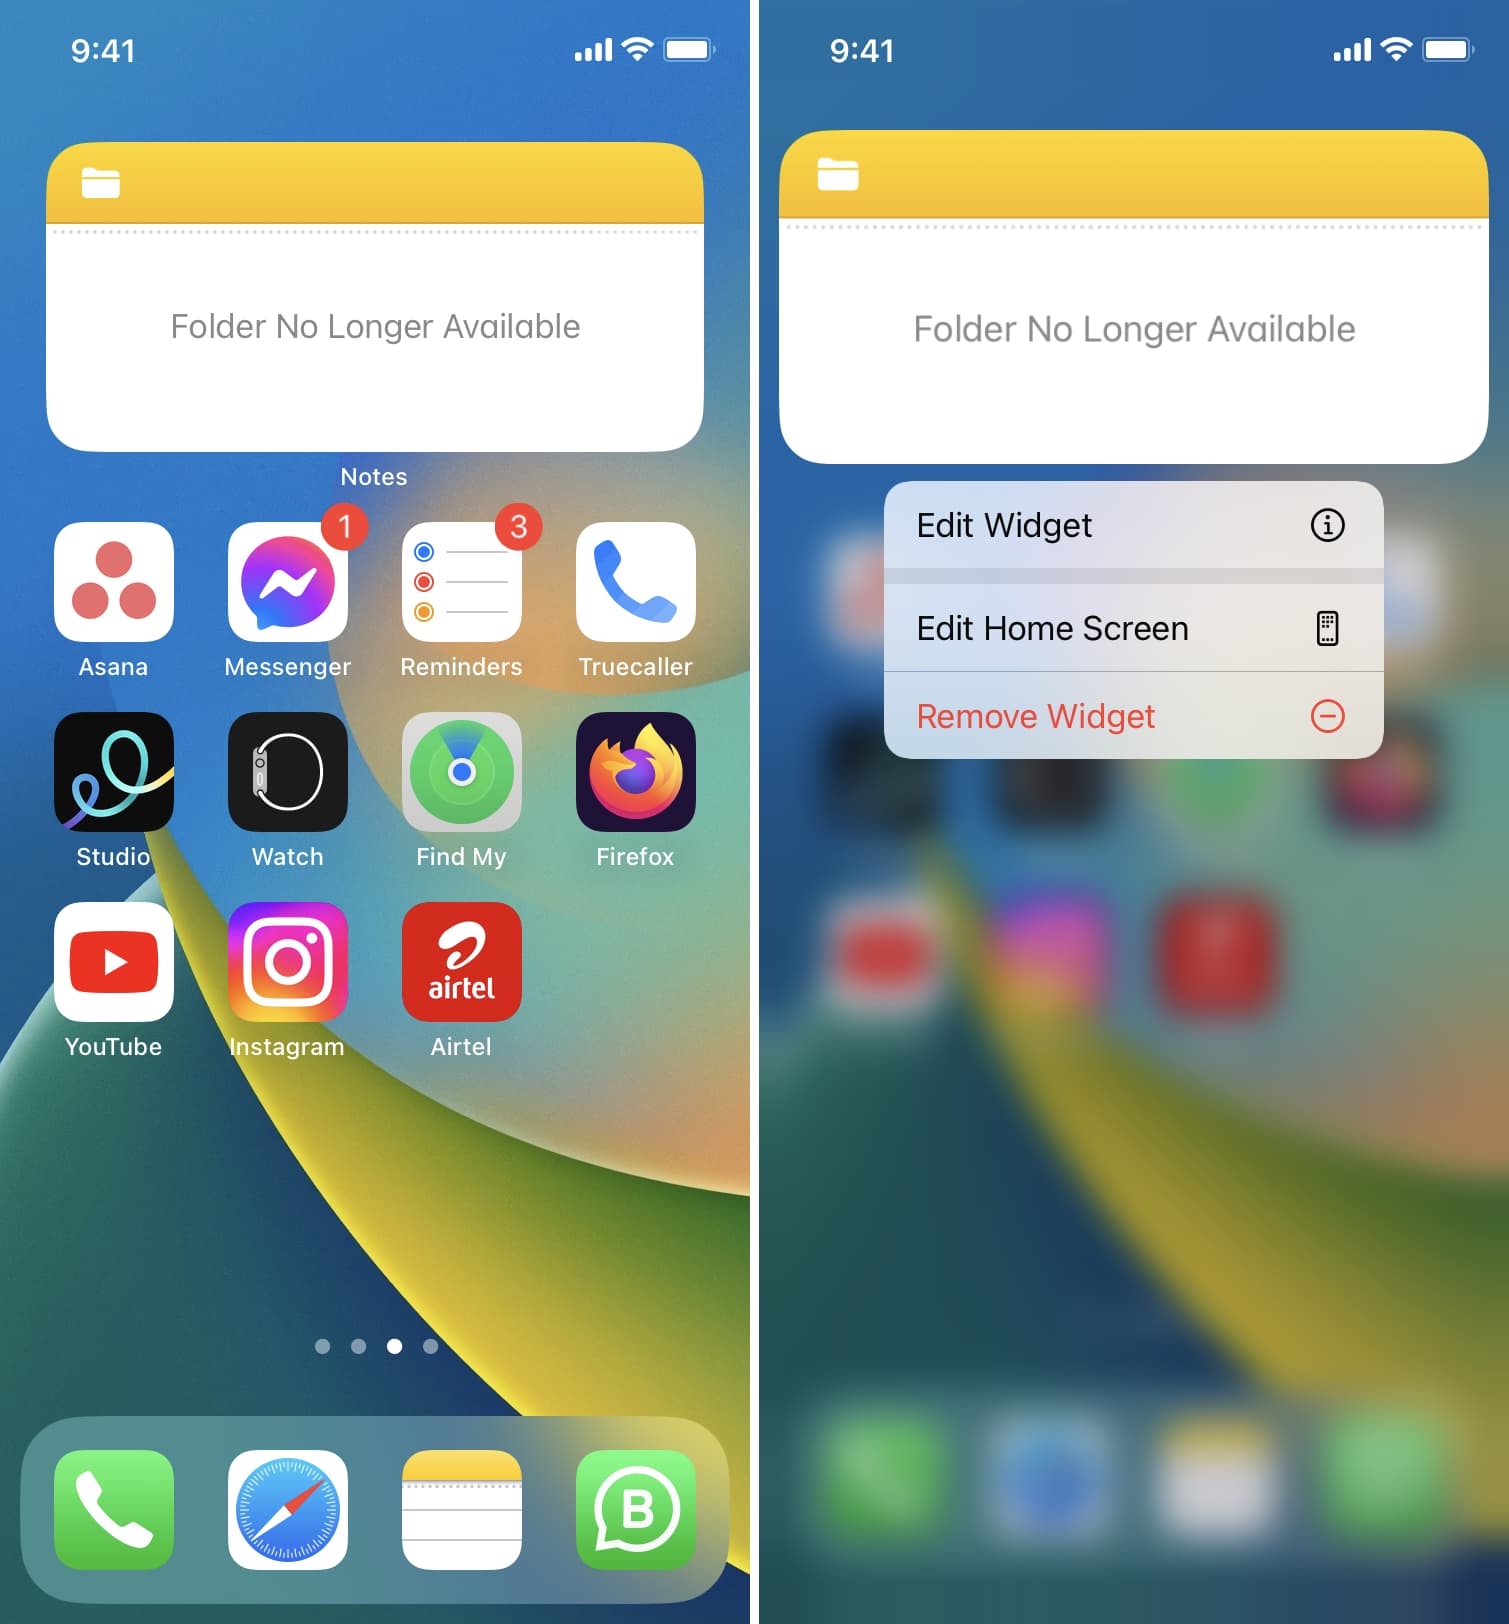 Fix Folder No Longer Available for Notes app widget on iPhone